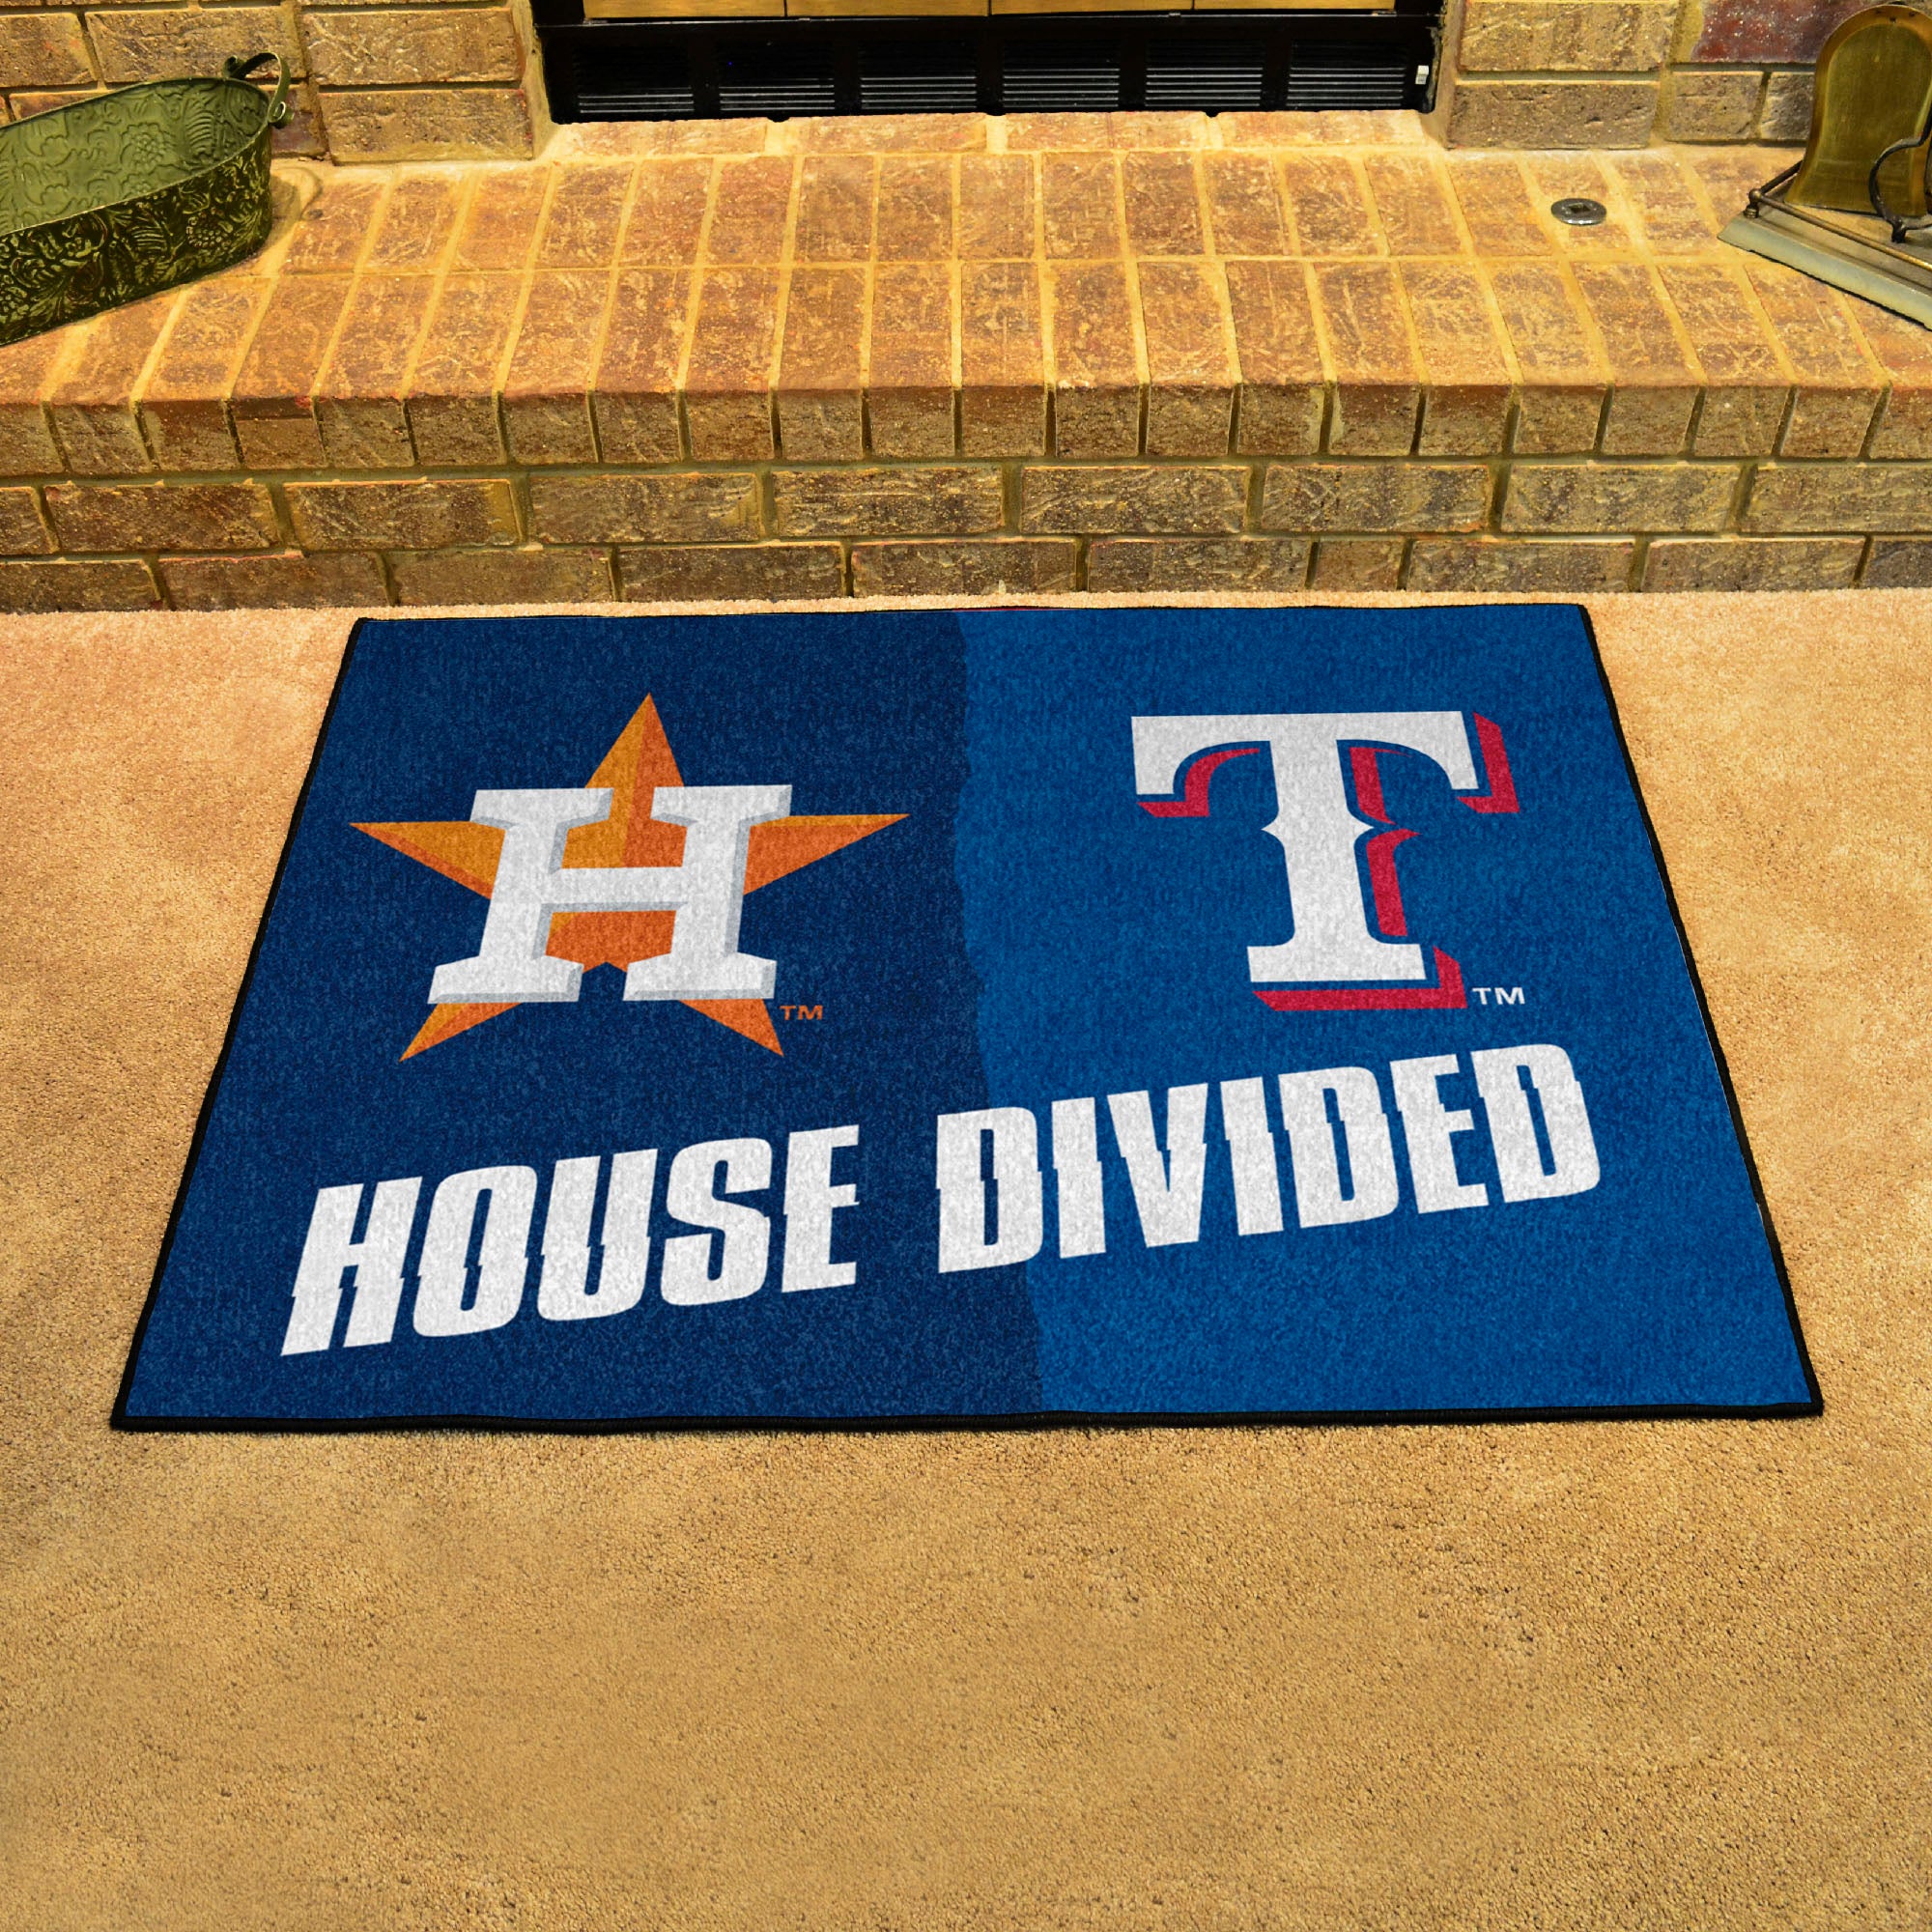 FANMATS, MLB House Divided - Astros / Rangers House Divided Rug